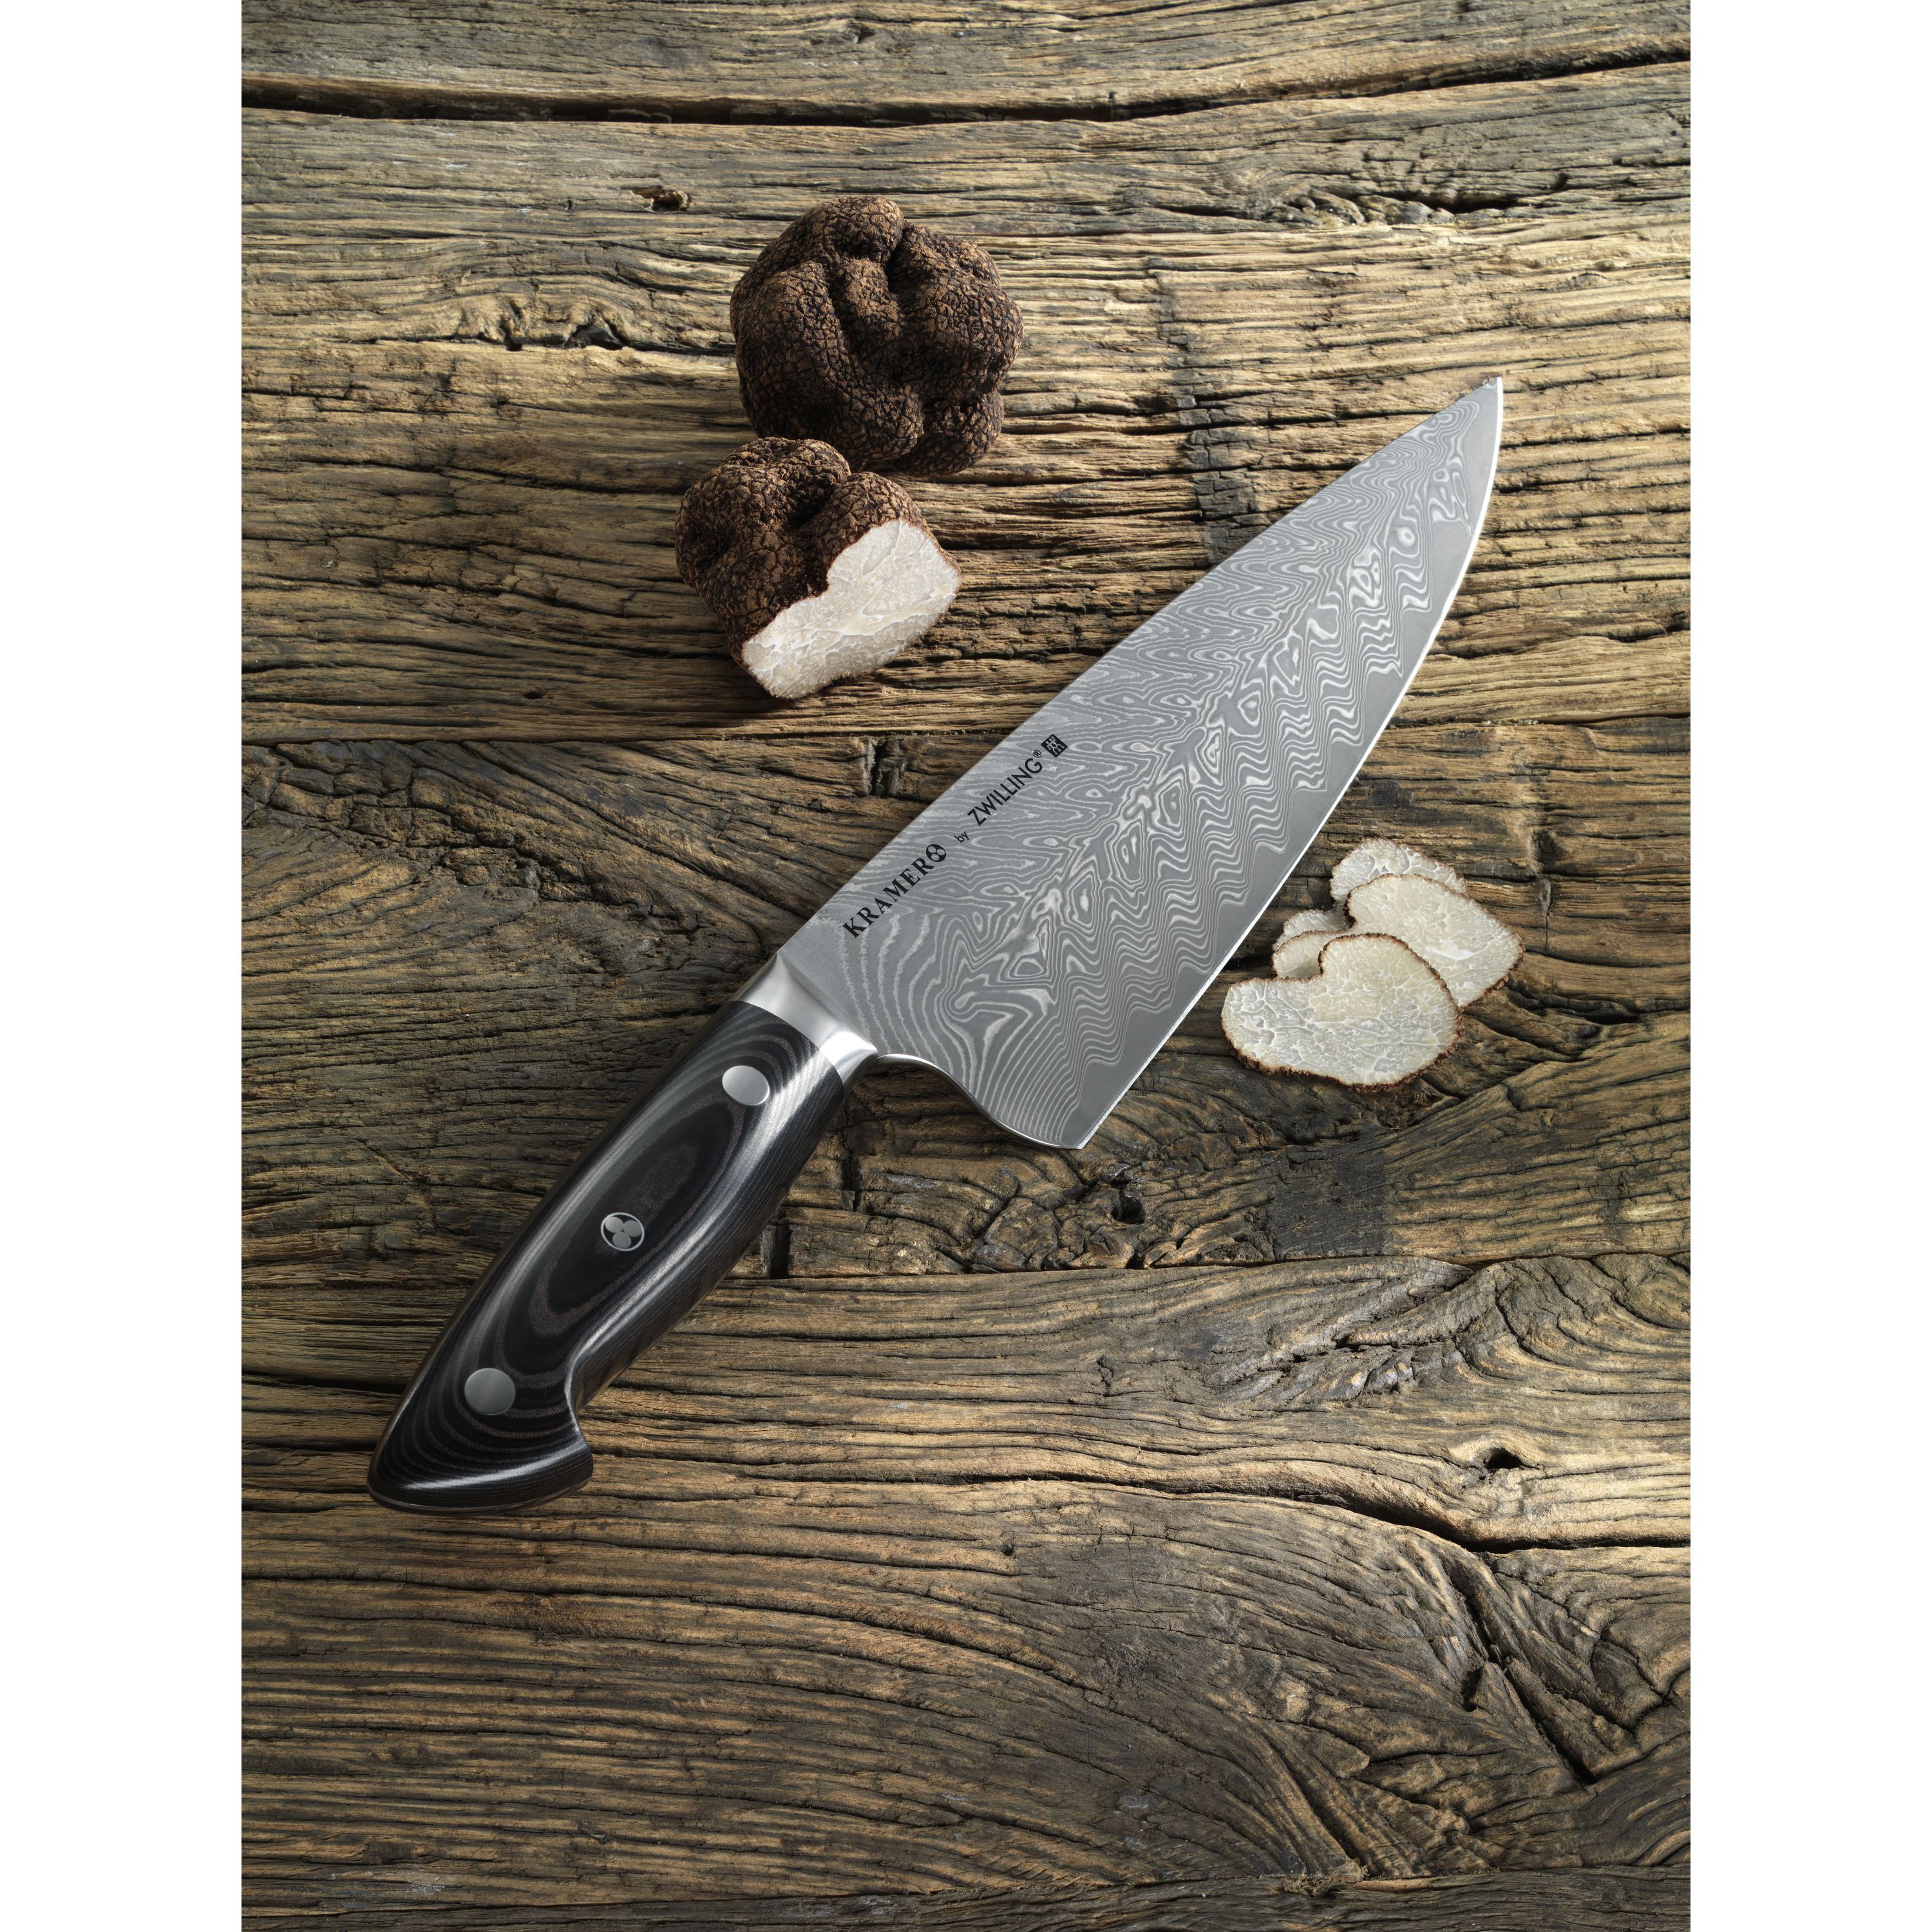  KRAMER by ZWILLING EUROLINE Damascus Collection 8-inch